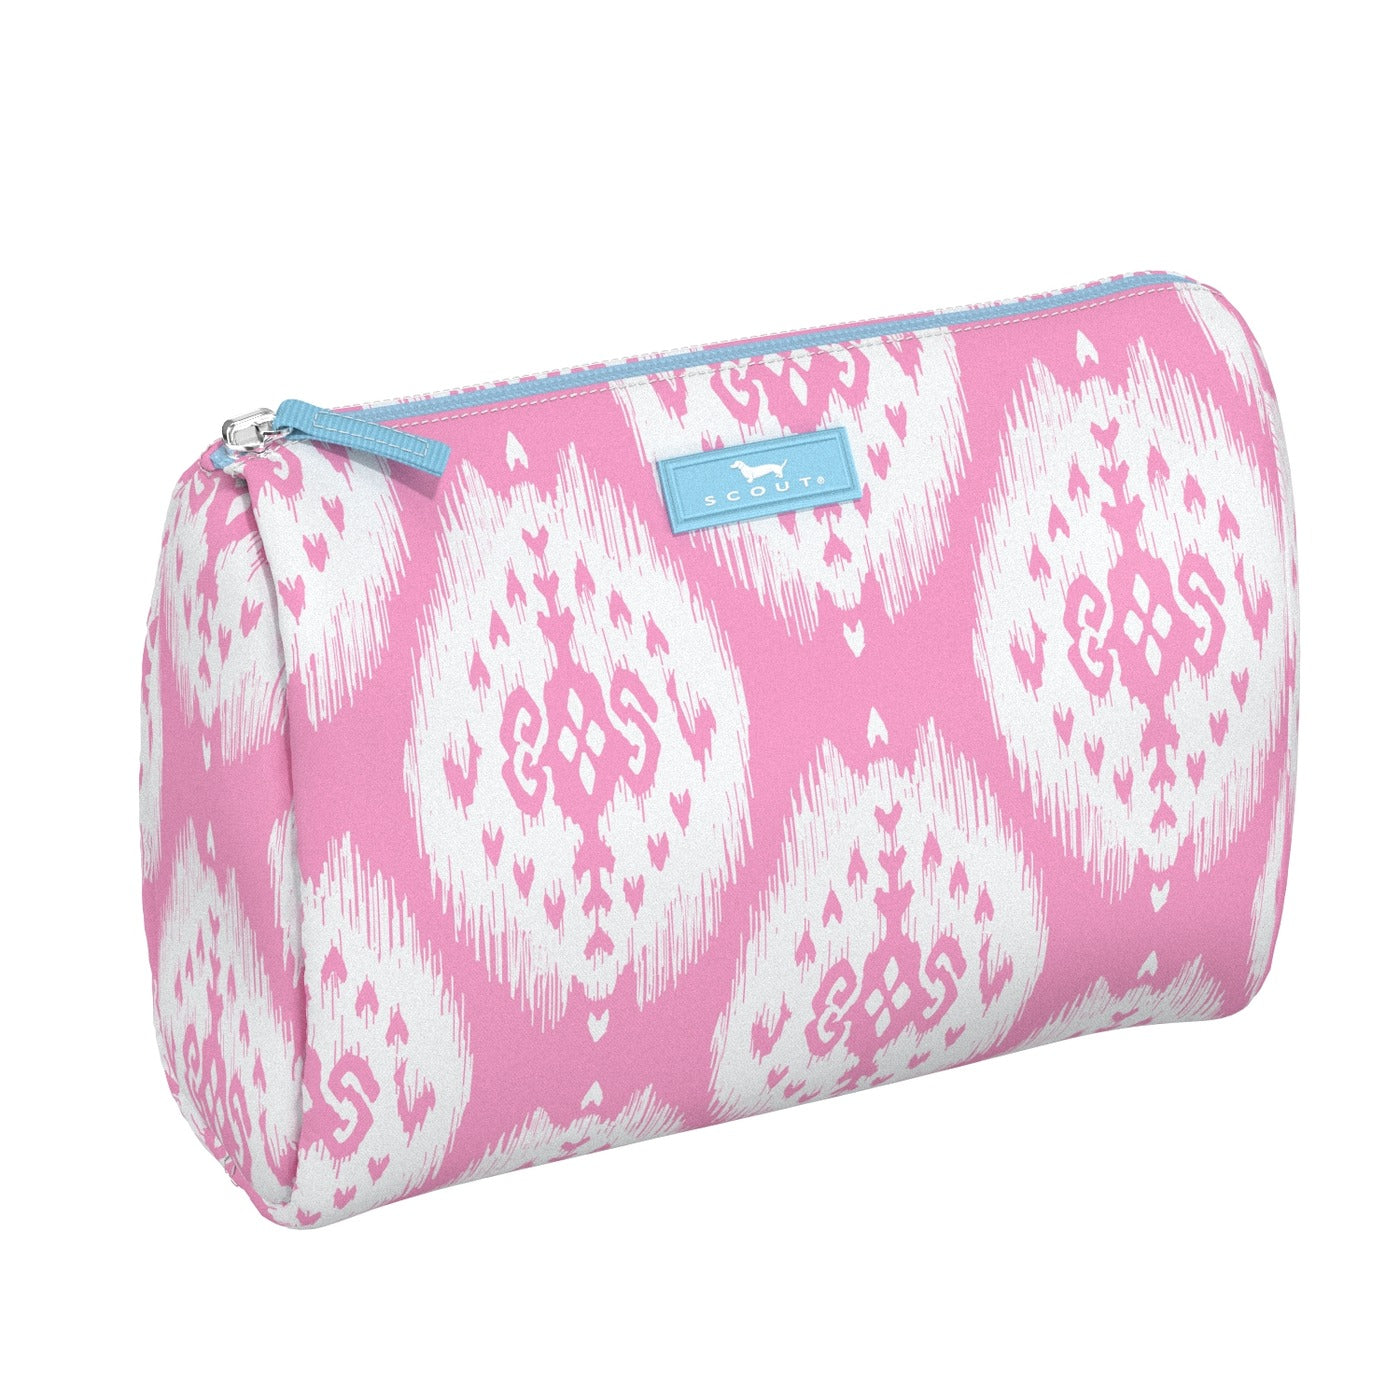 Packin Heat Make up Bag by Scout